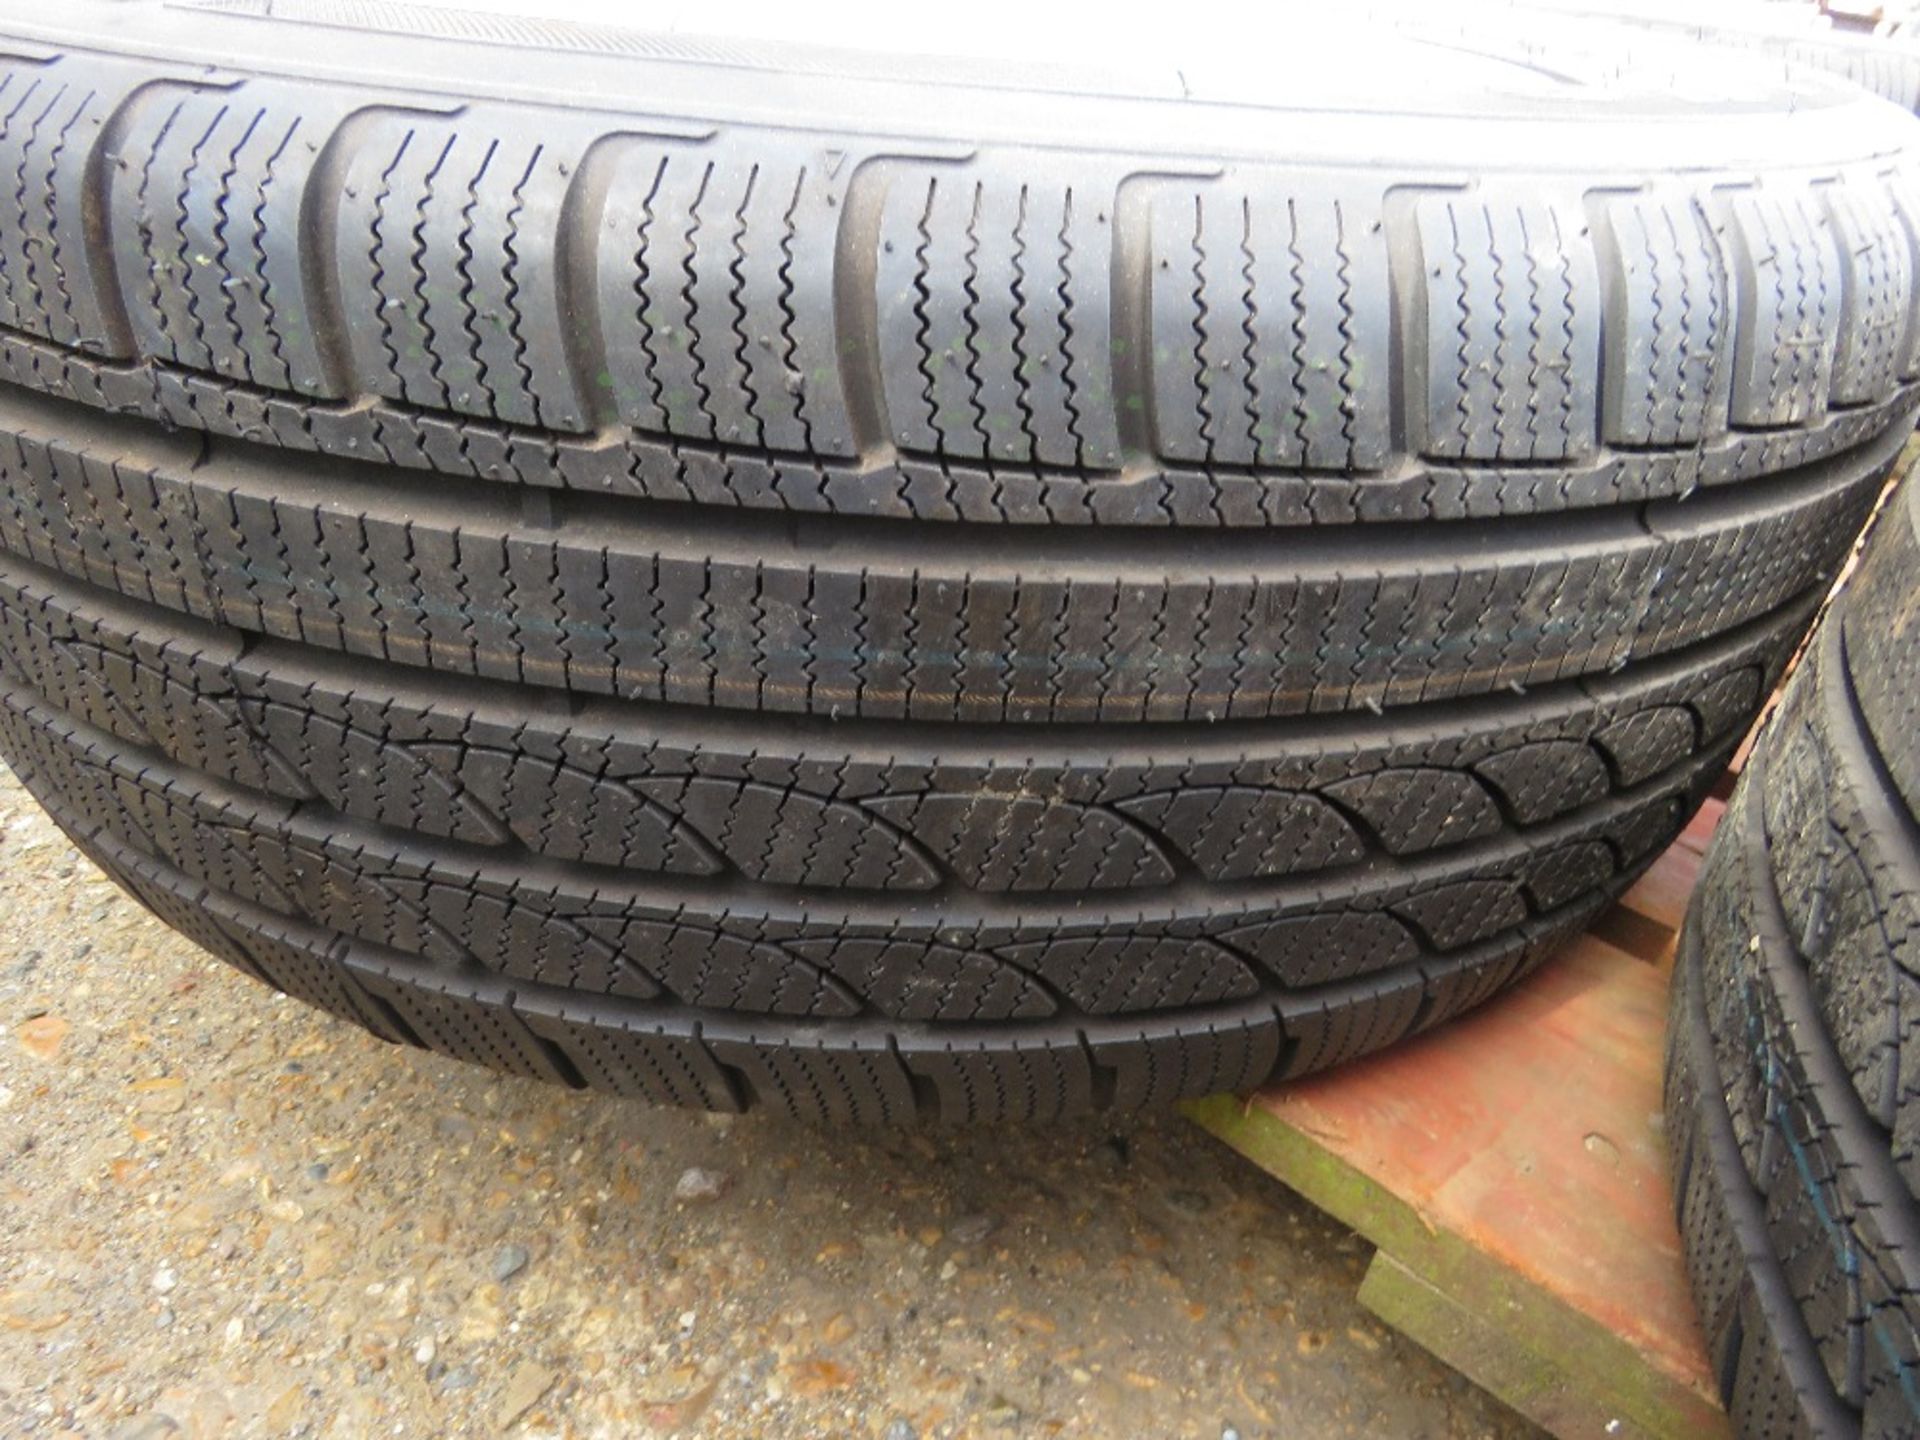 SET OF VW 235/55R17 SNOW TYRES ON ALLOY RIMS. - Image 4 of 5